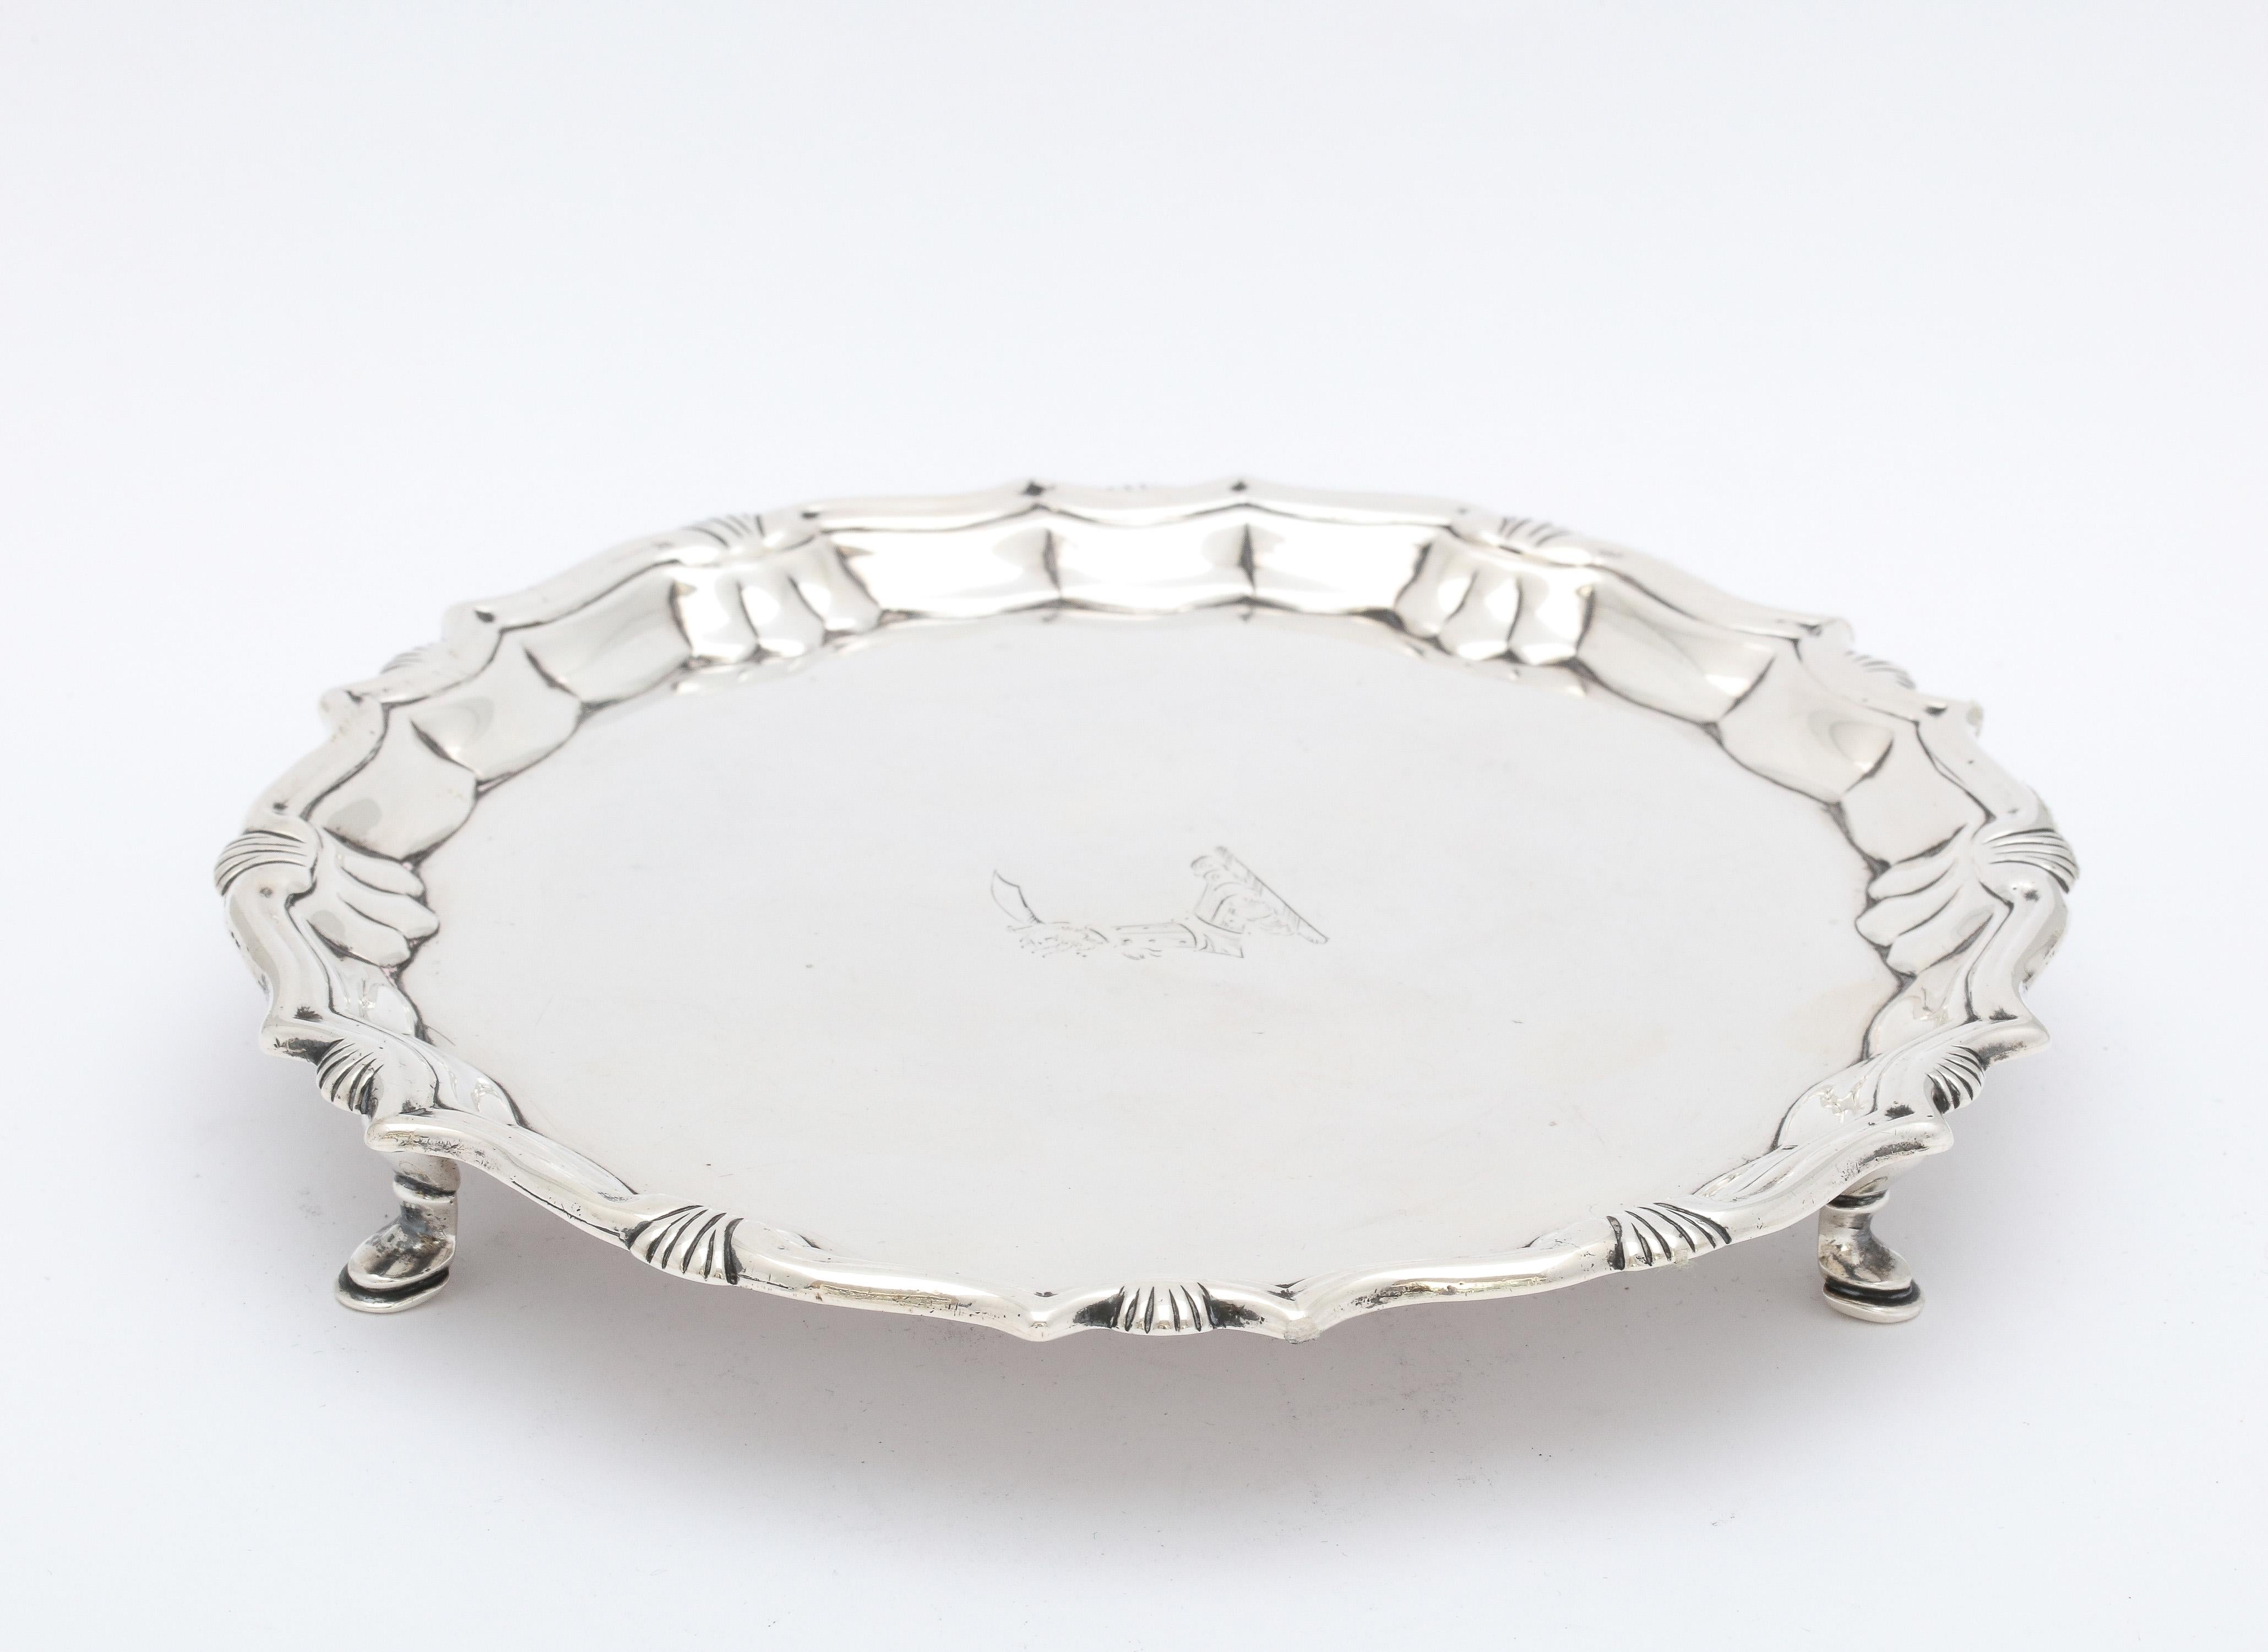 George II, sterling silver, footed salver/tray, London, year-hallmarked for 1744, Robert Abercromby - maker. Scalloped border. Salver has a central armorial of a raised arm in armor holding a scimitar. Measures almost 6 3/4 inches diameter x 1 inch